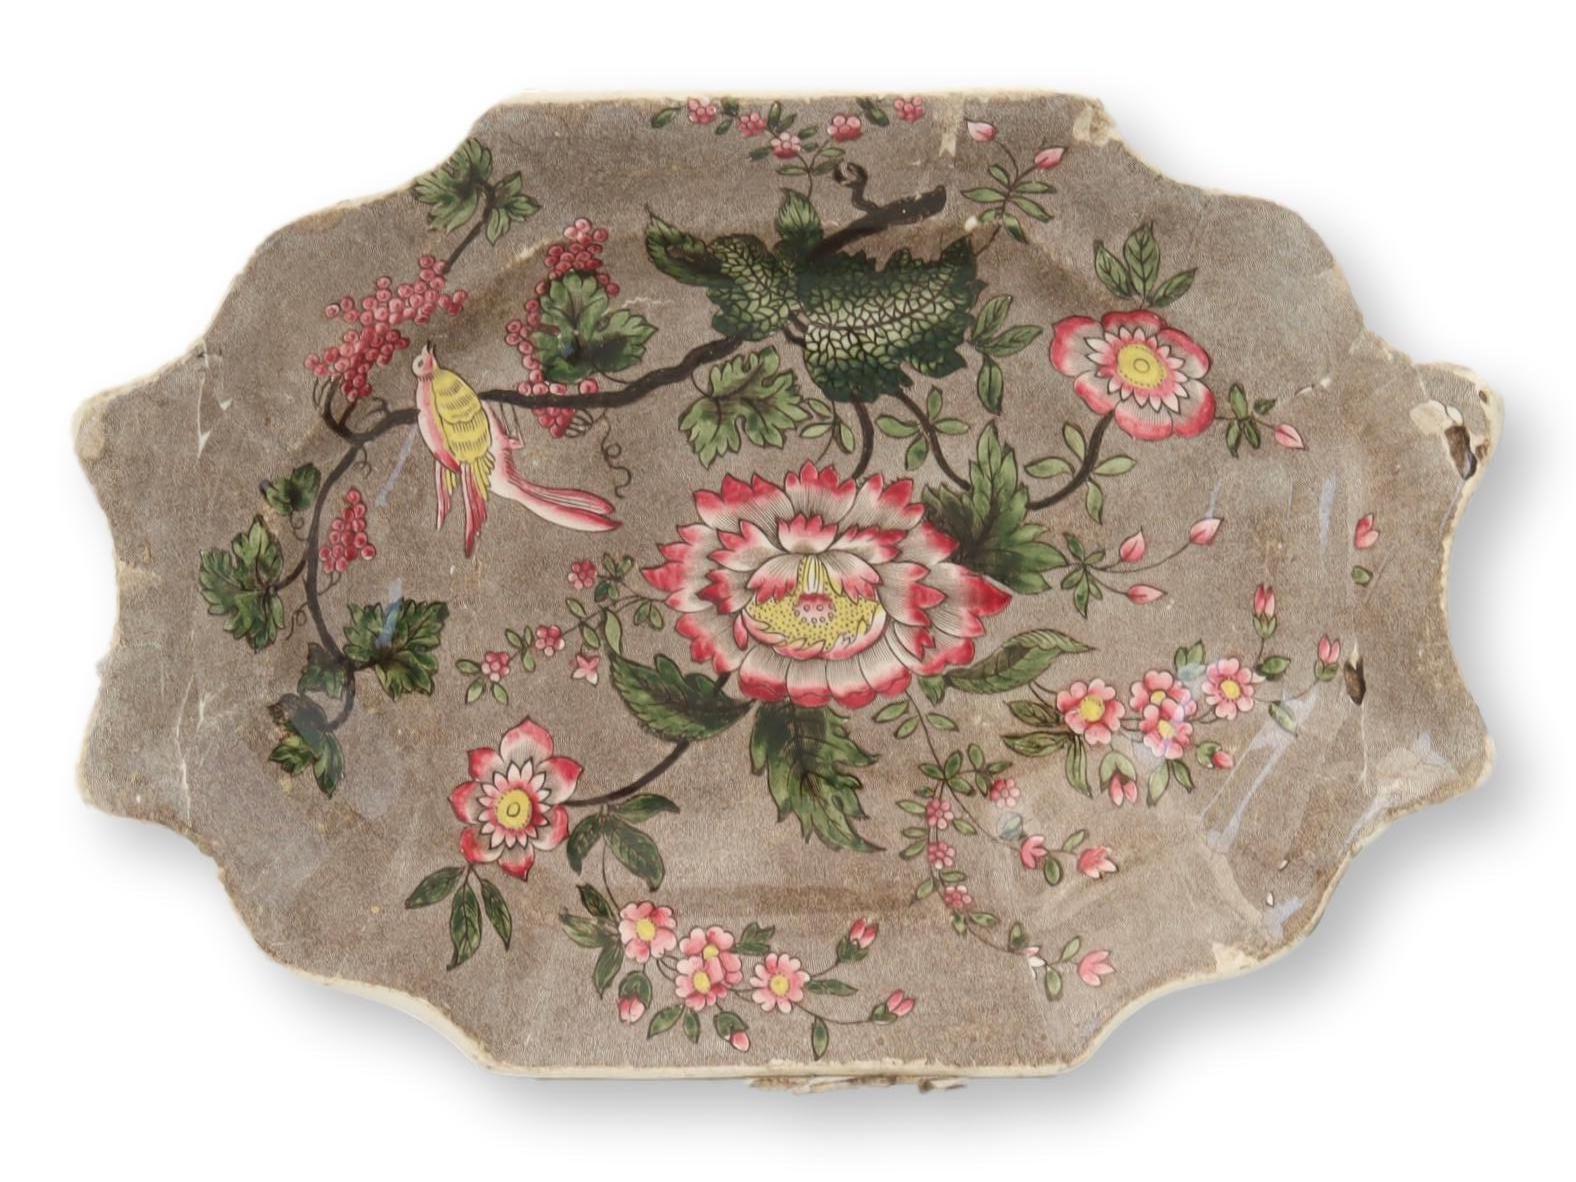 1820s Spode Chinoiserie Serving Dish~P77676240